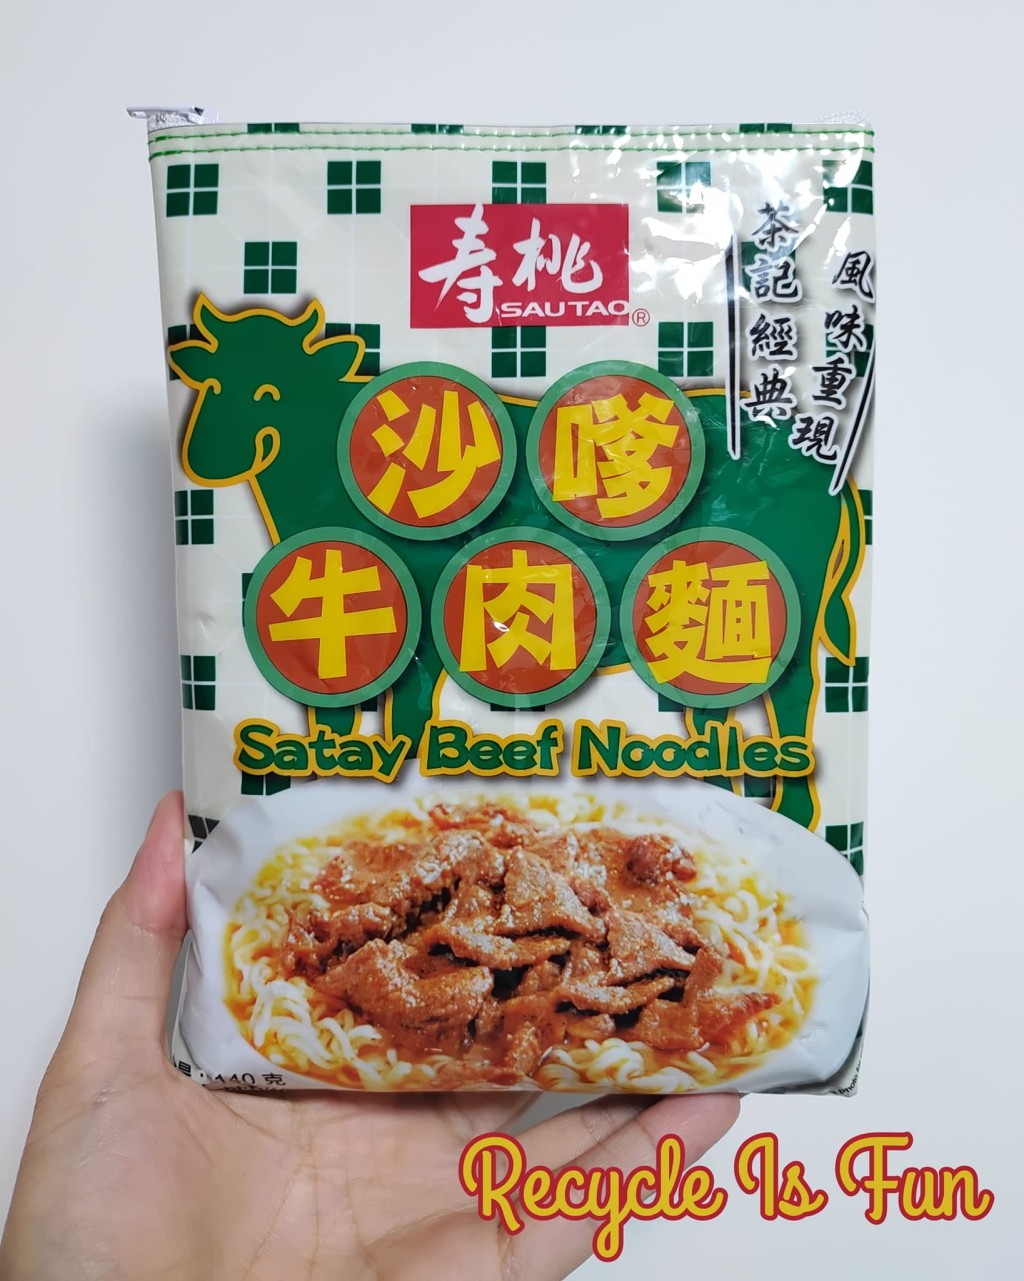 Recycle Is Fun的「沙嗲牛肉面」小物袋。